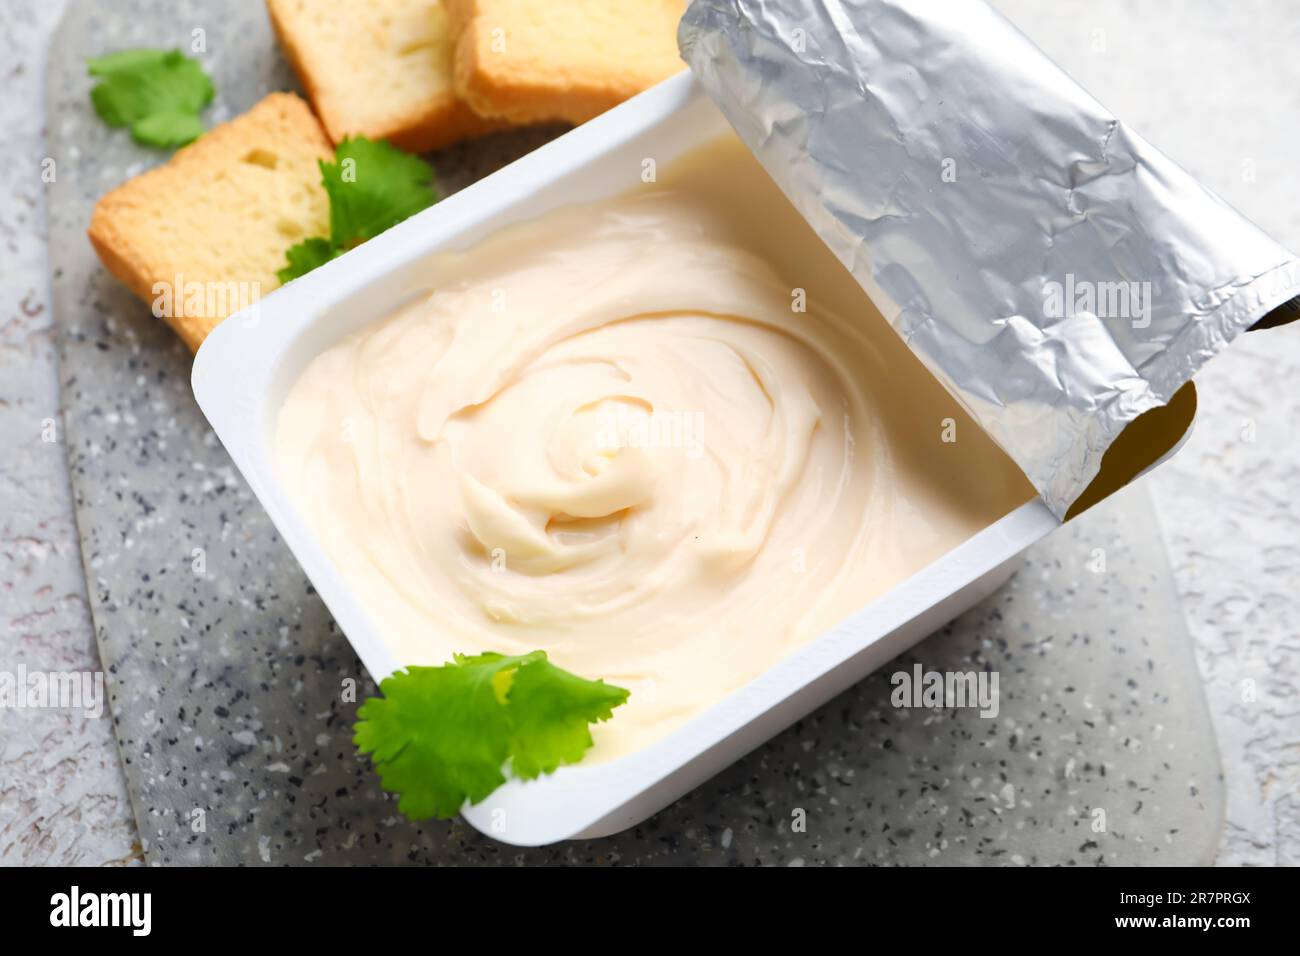 https://c8.alamy.com/comp/2R7PRGX/plastic-container-with-tasty-cream-cheese-on-table-2R7PRGX.jpg